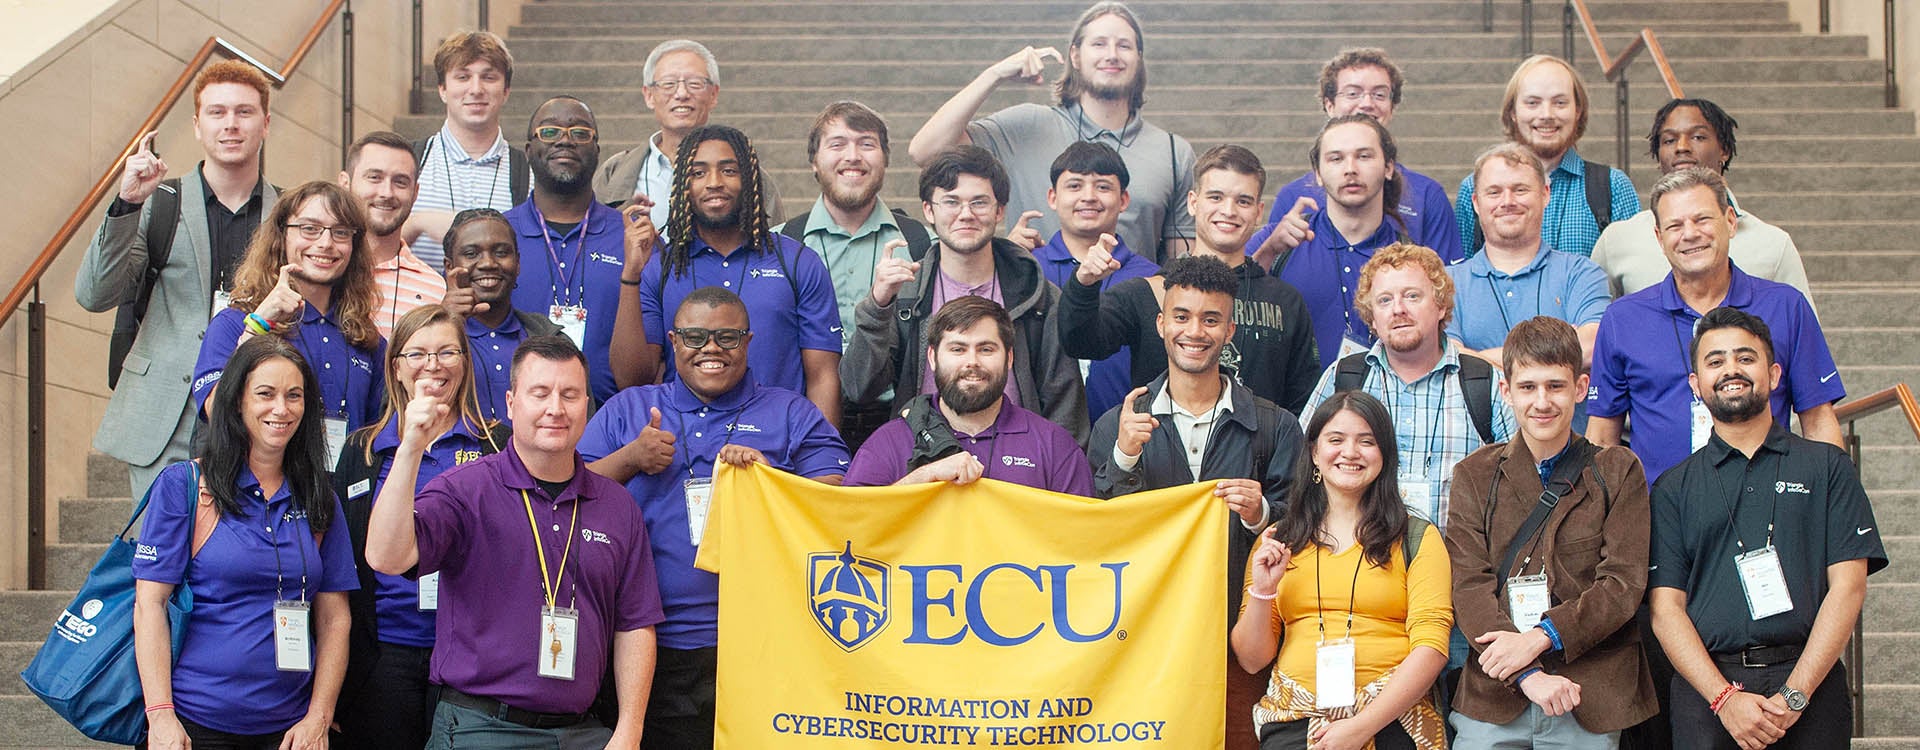 ECU Department of Technology Systems students, faculty and alumni pose for a photograph during the Information Systems Security Association’s InfoSeCon Conference in Raleigh. (Contributed photo)